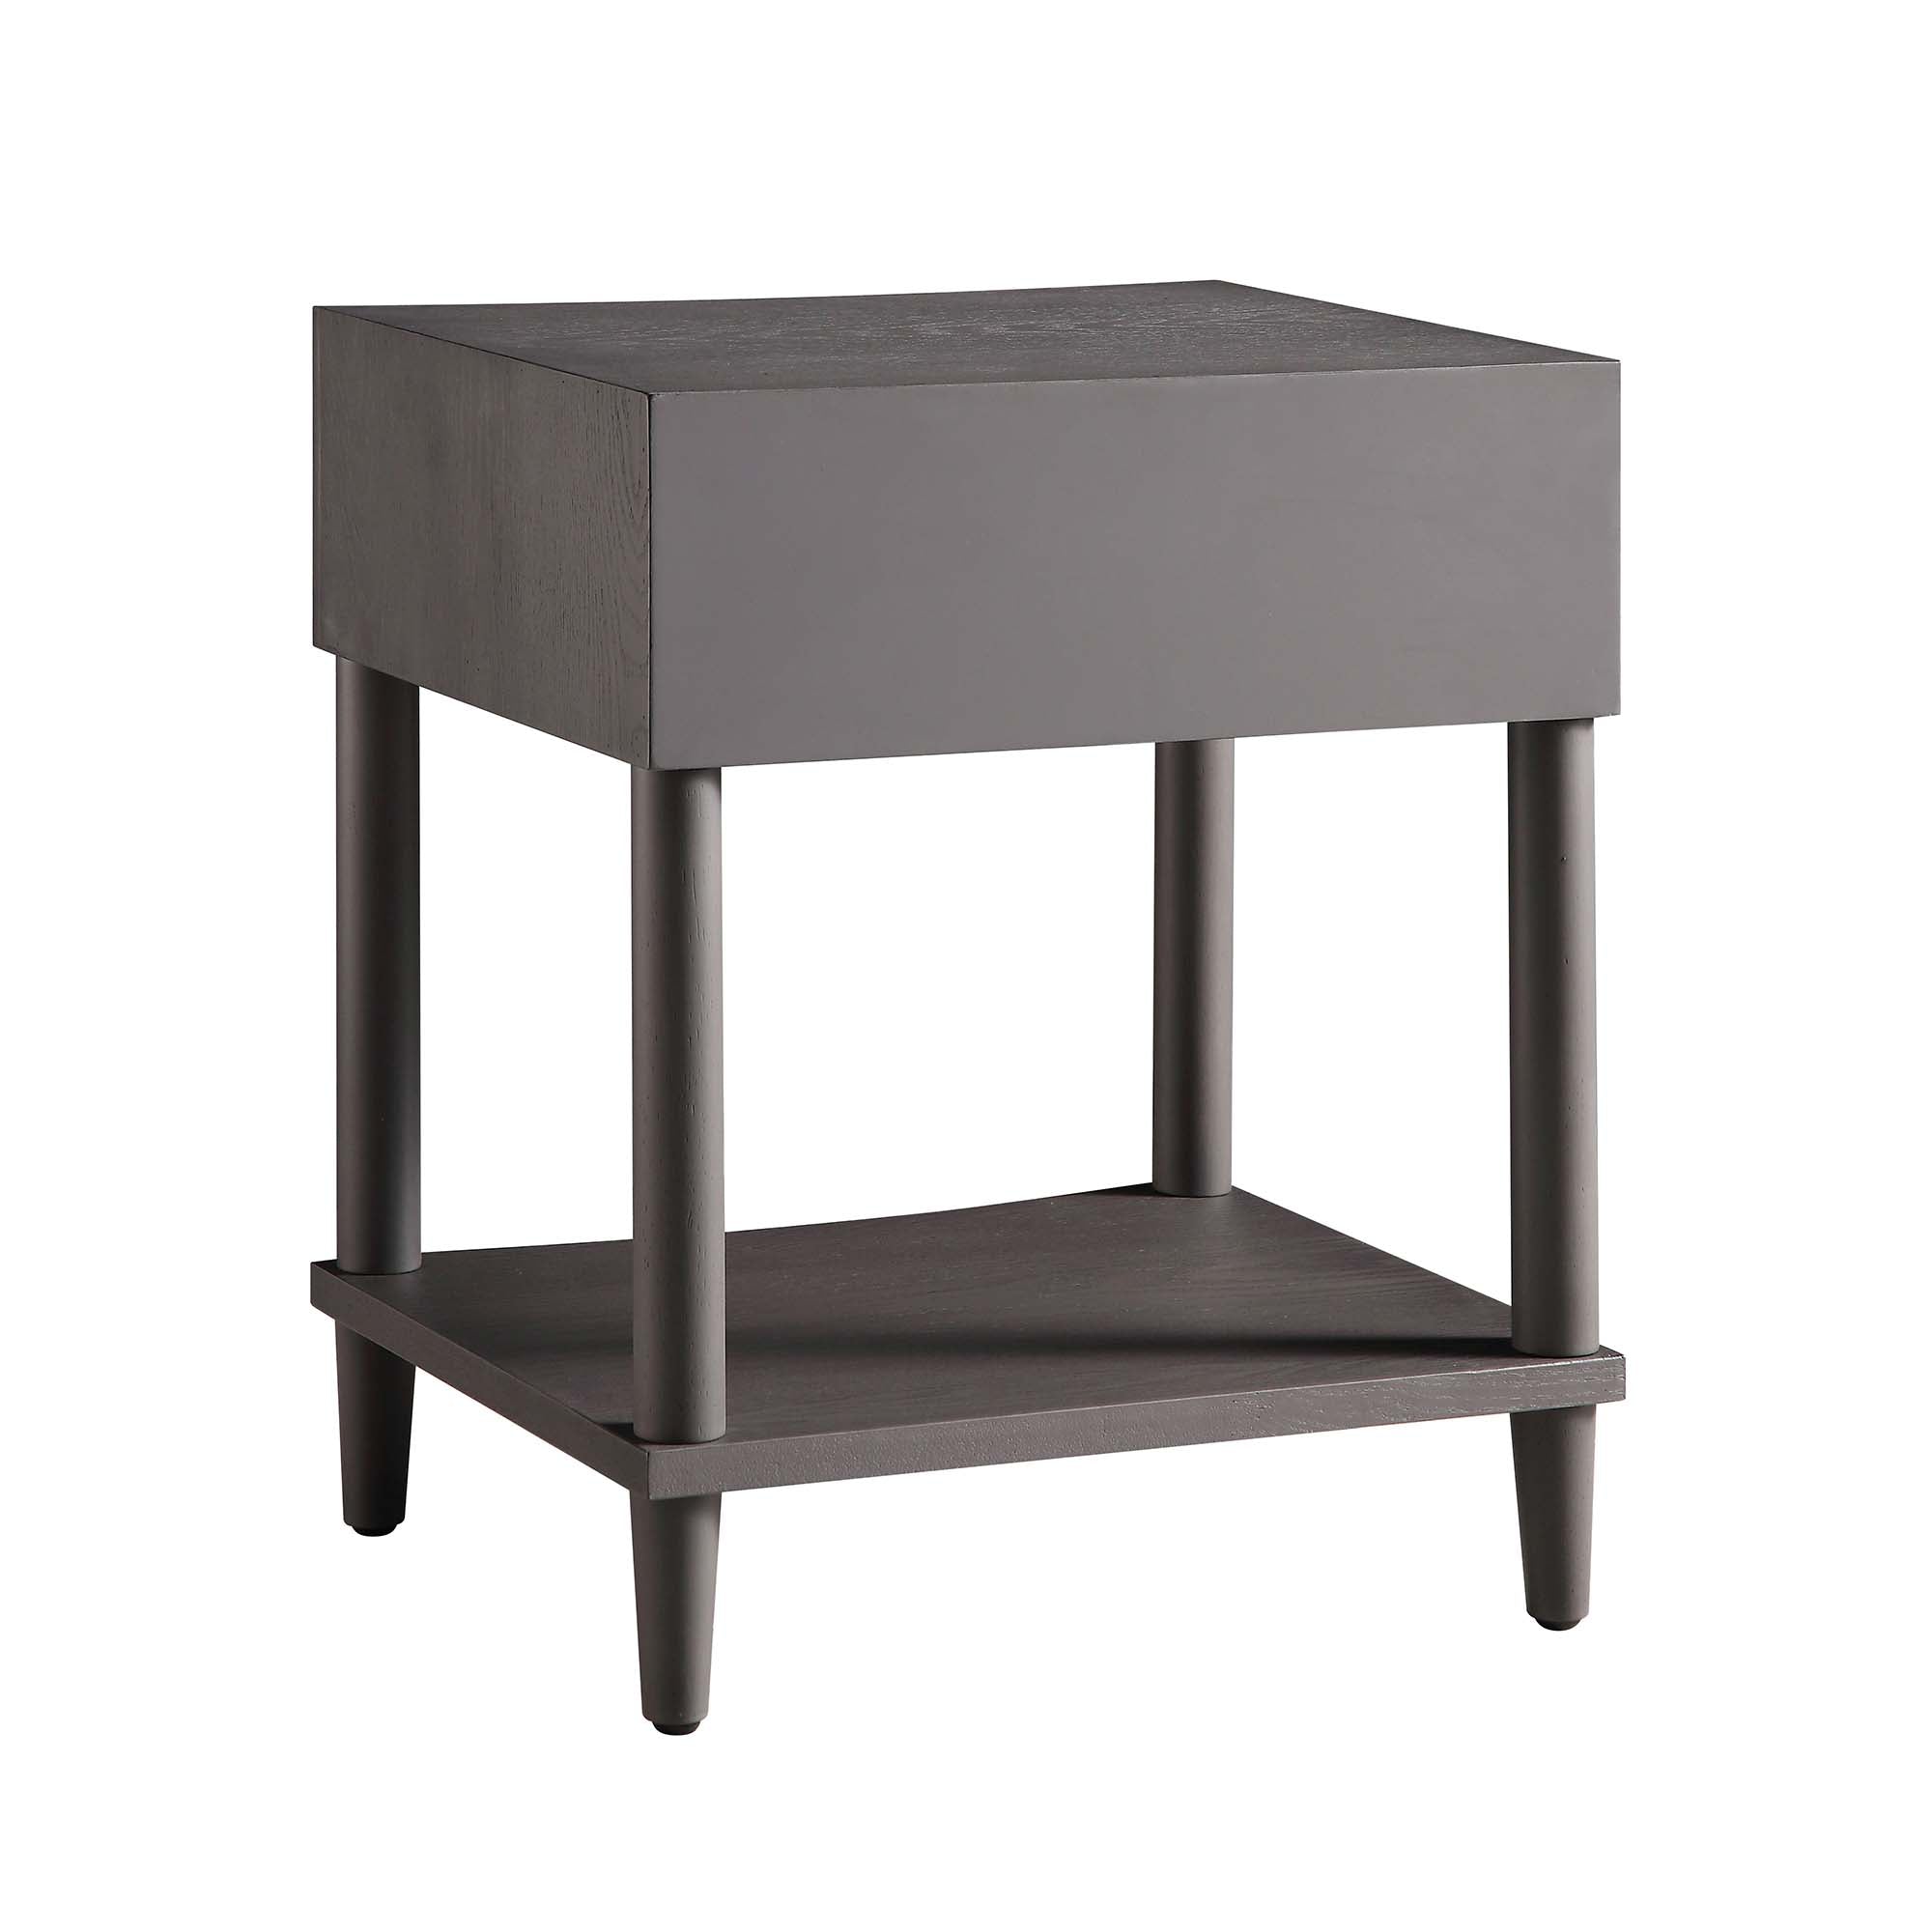 Thalia Concave 1 Drawer Bedside Table, Silver Oak